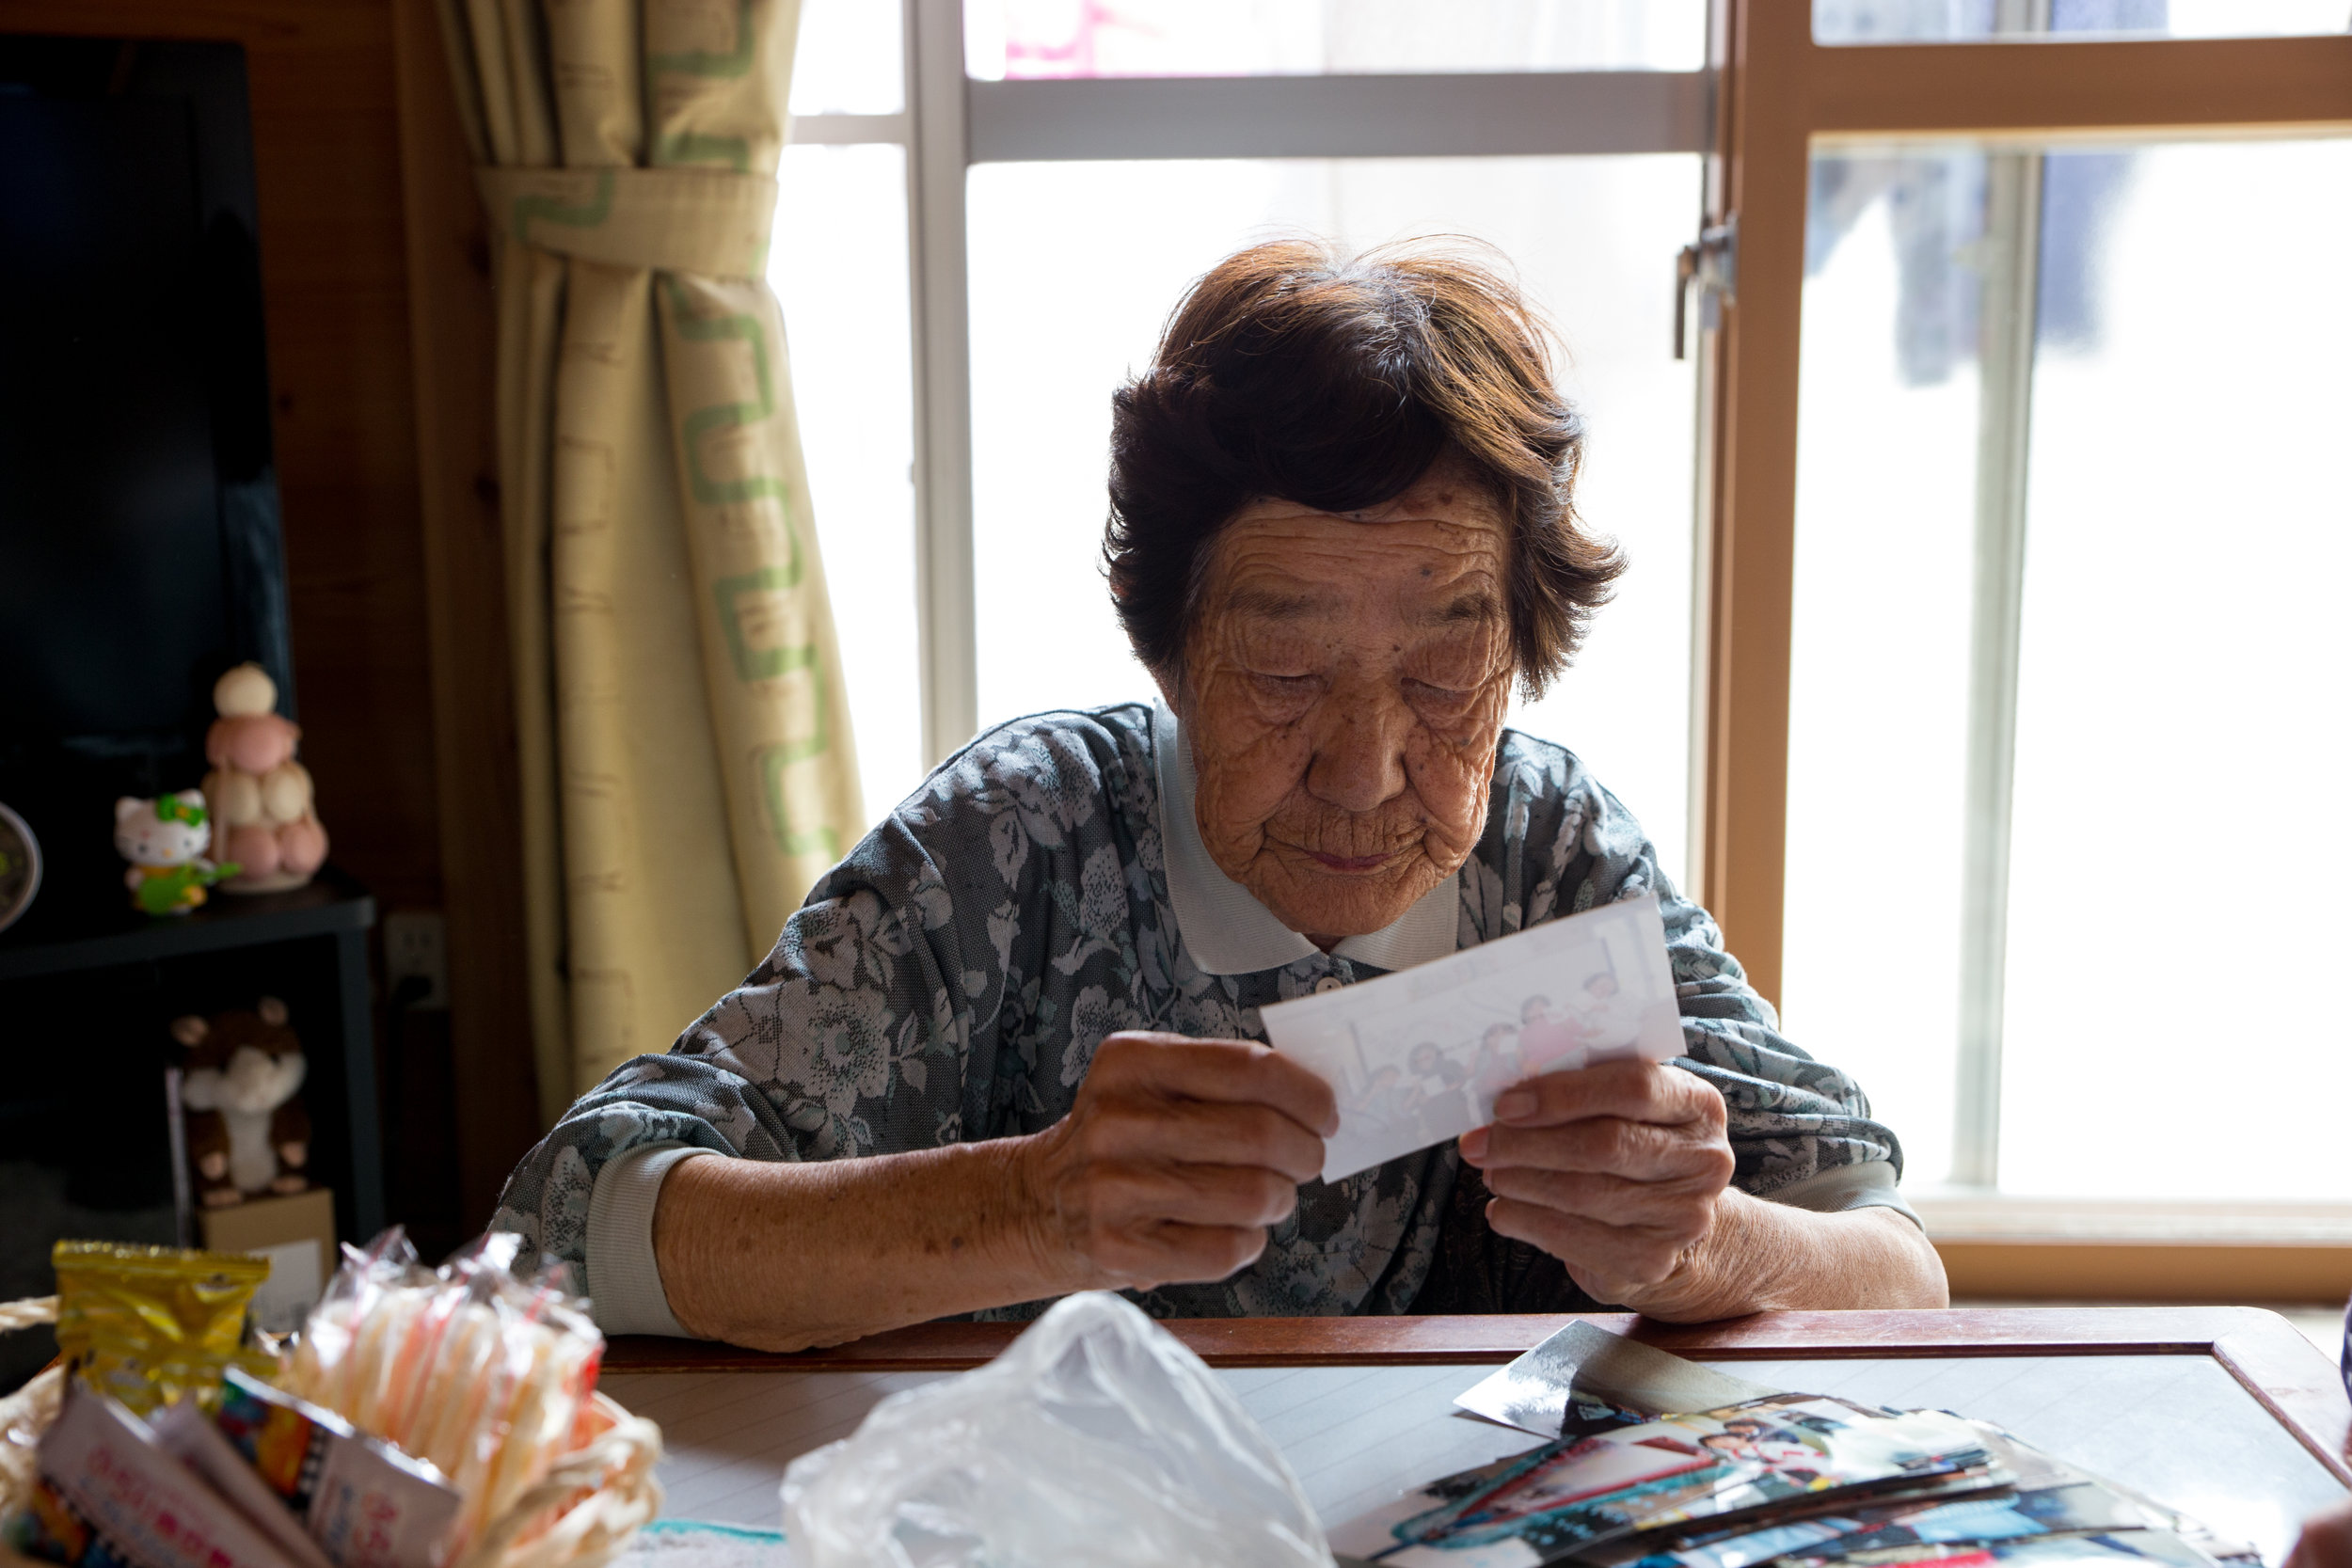  Kiyoko Shiga lived in Naraha for over 60 years. Family photos are the only memories she has to remember her longtime home. 